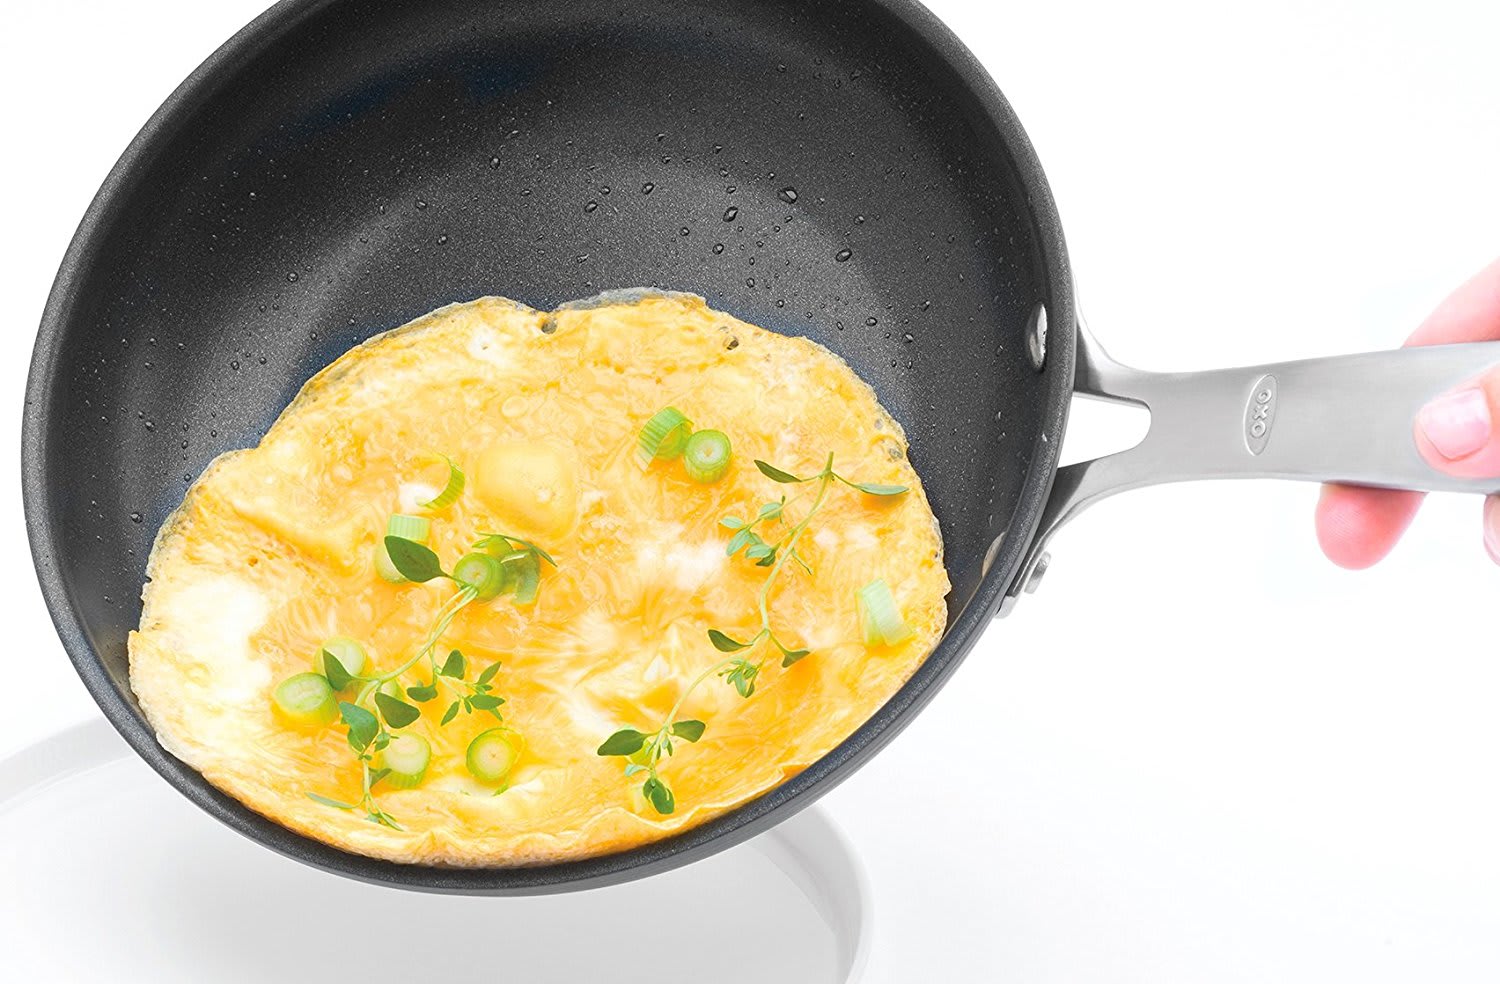 Are nonstick pans safe? Truth about nonstick cookware